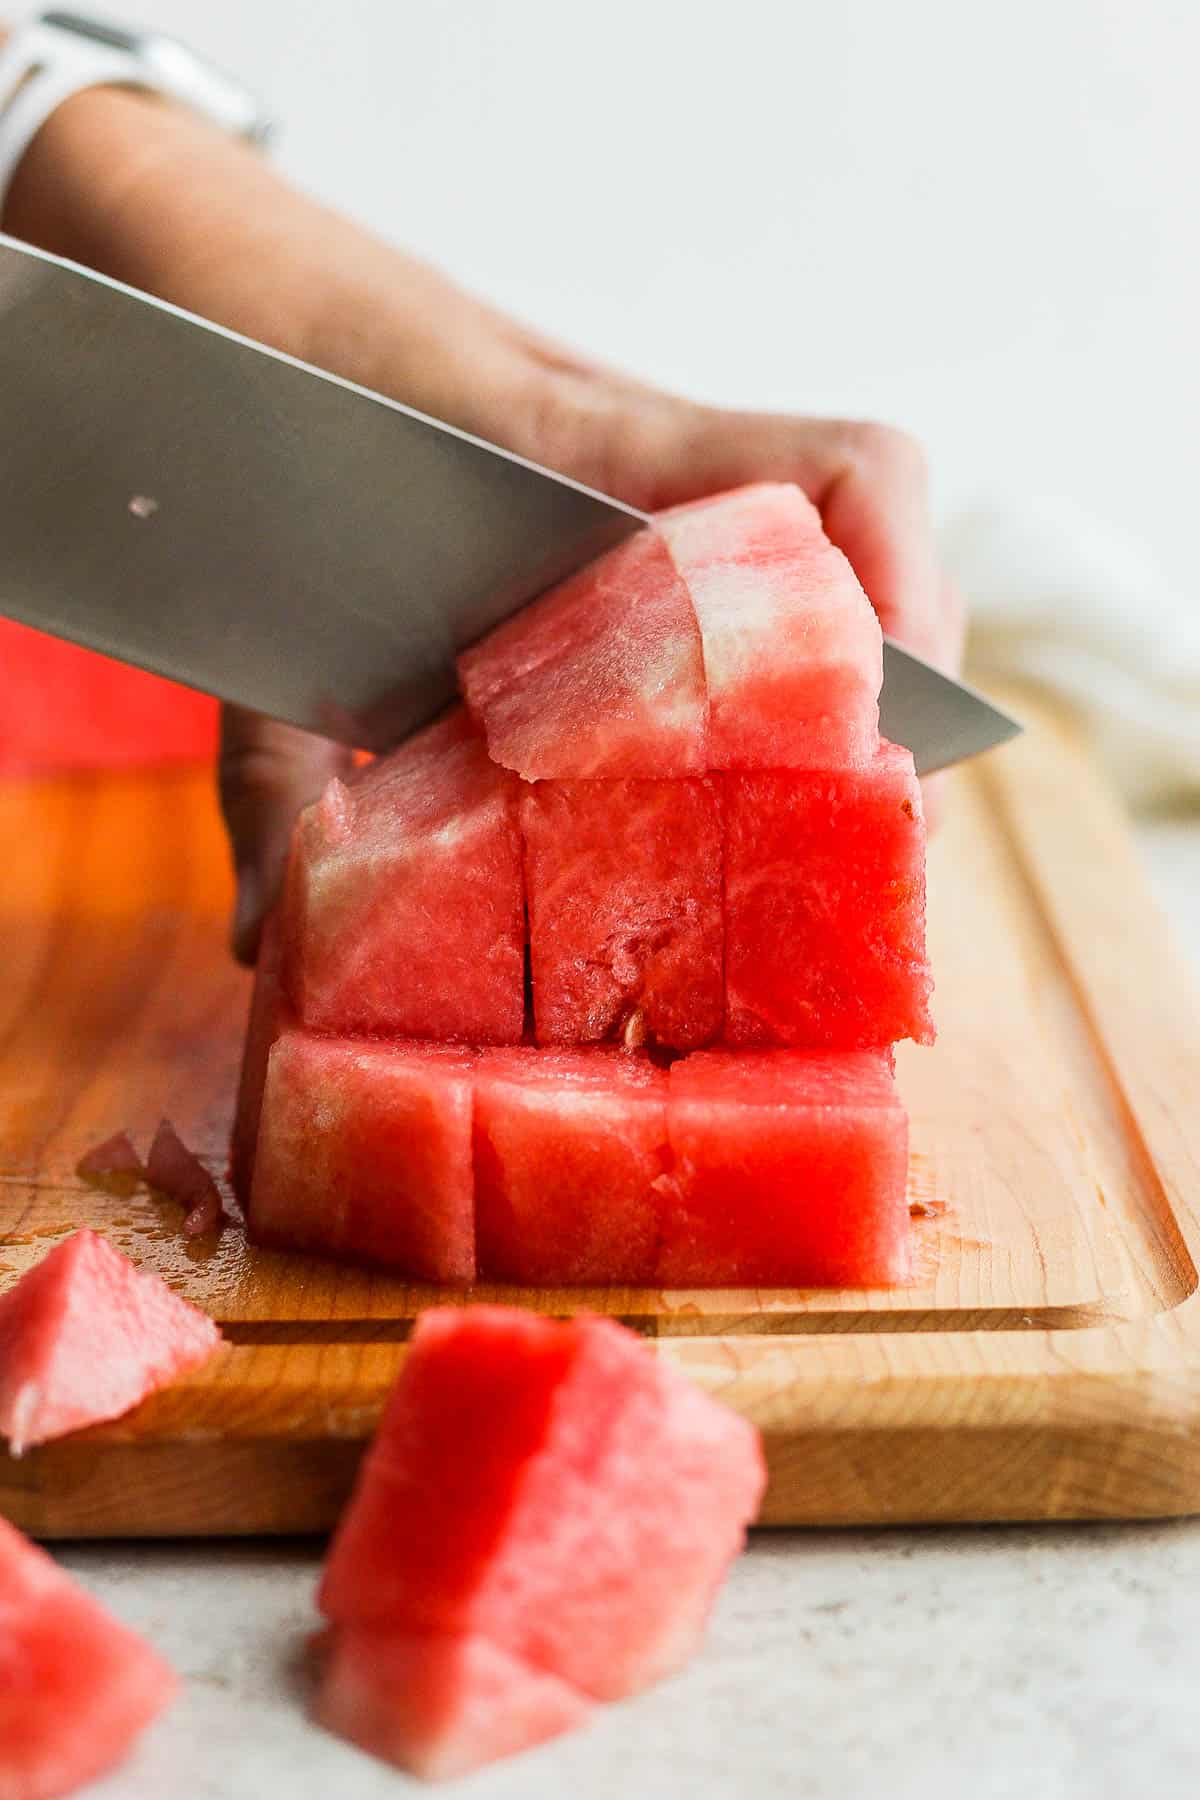 A large piece of watermelon being cut into cubes on a cutting board.